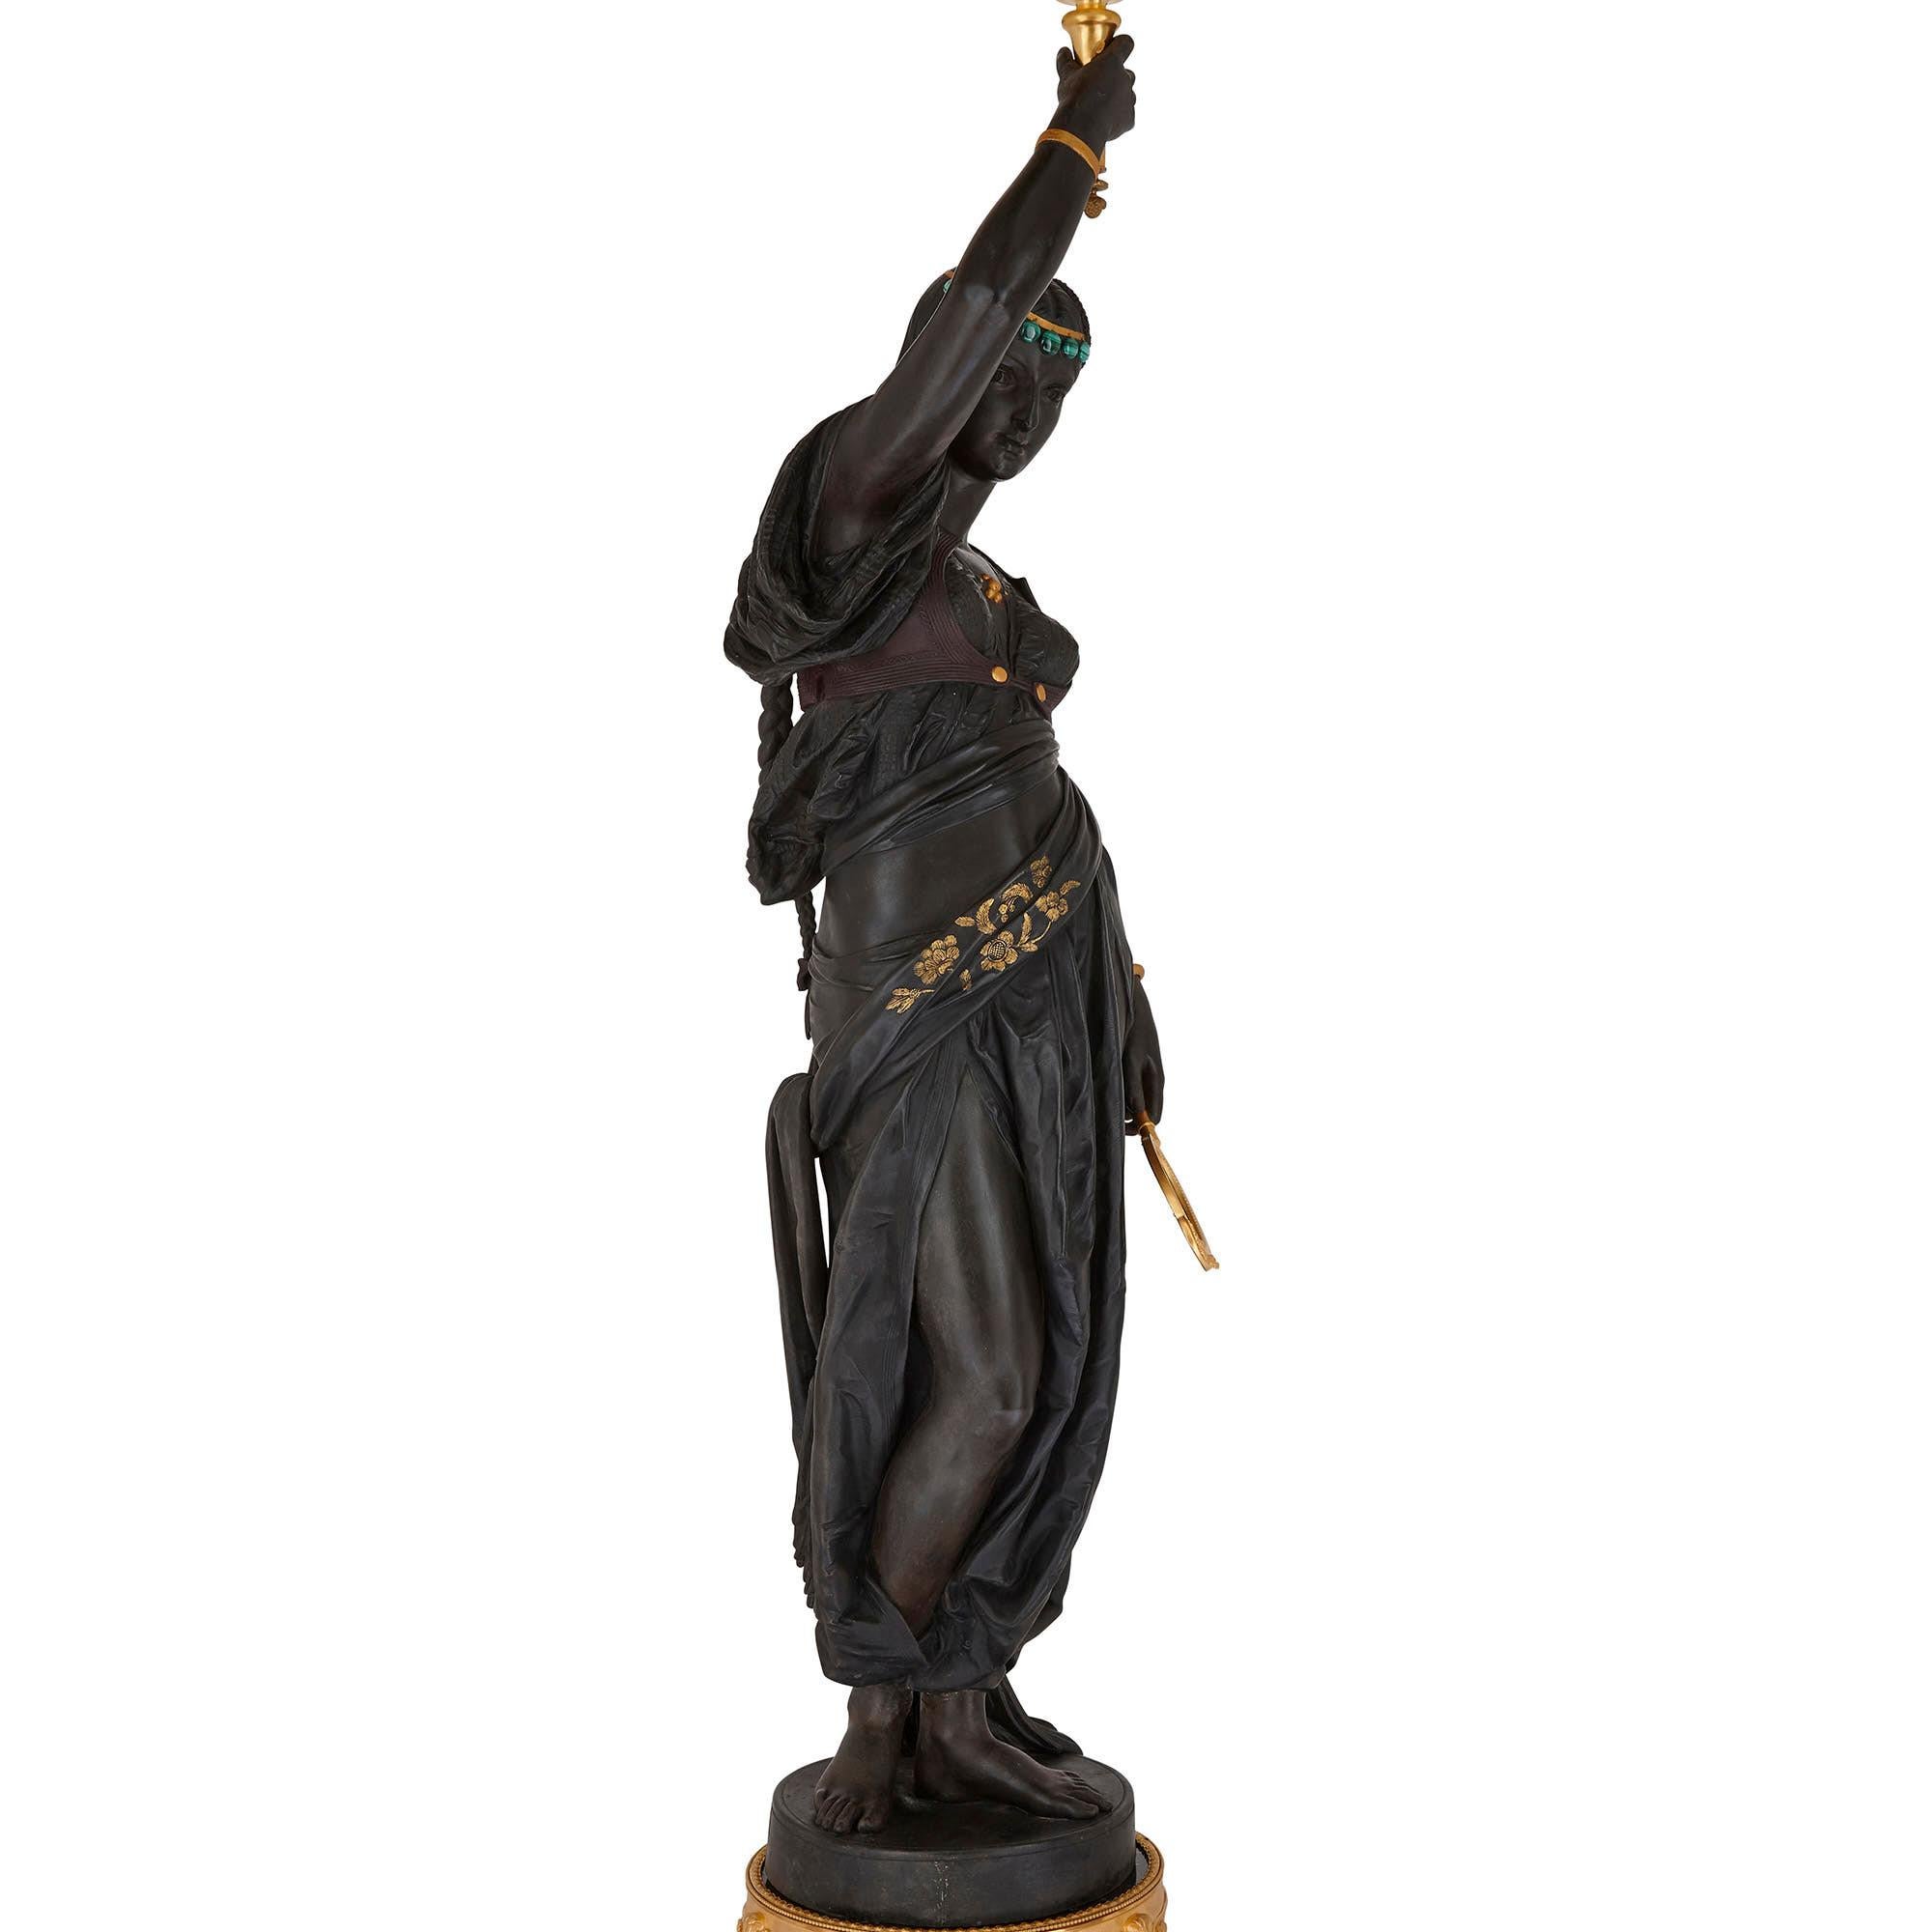 Standing over two and a half metres tall, this sculpture is truly exceptional—an unusual, and remarkable, statement piece. The sculpture features a standing female figure, her dress distinctly Orientalist in nature. She is cast from bronze, with